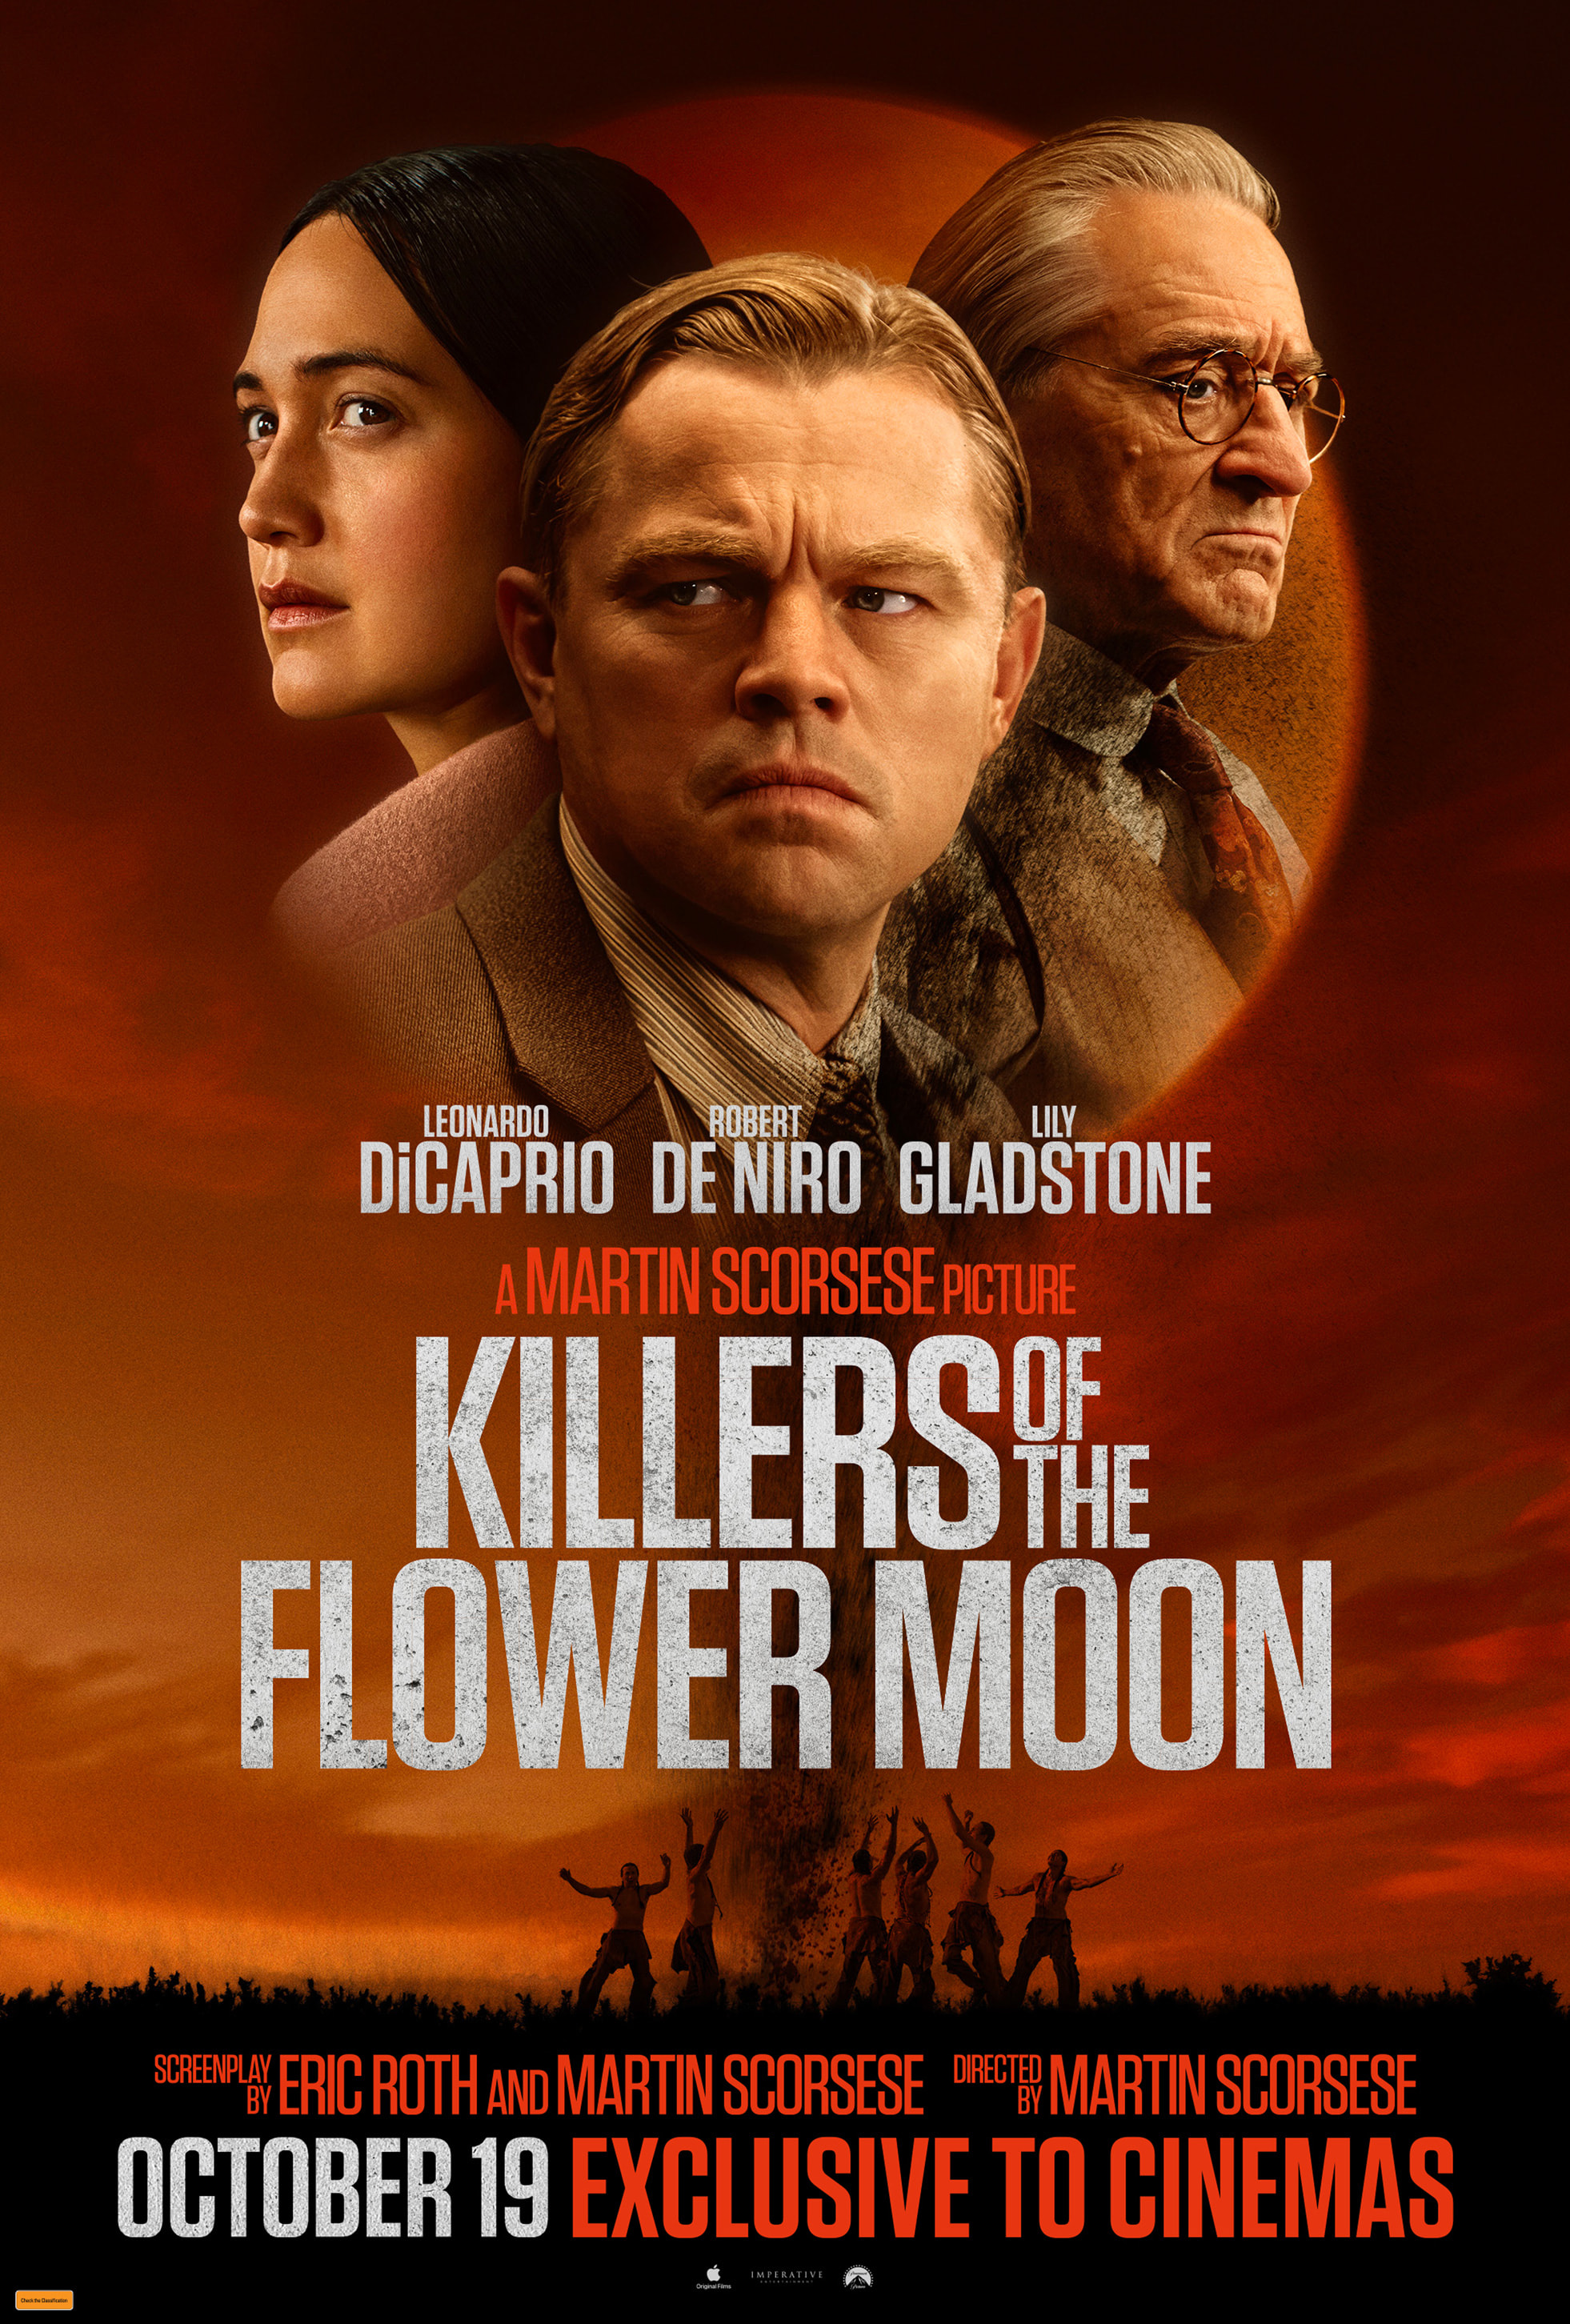 Killers of the Flower Moon Has Scorsese's Best Box Office Opening Since  2010 Leo DiCaprio Movie - IMDb